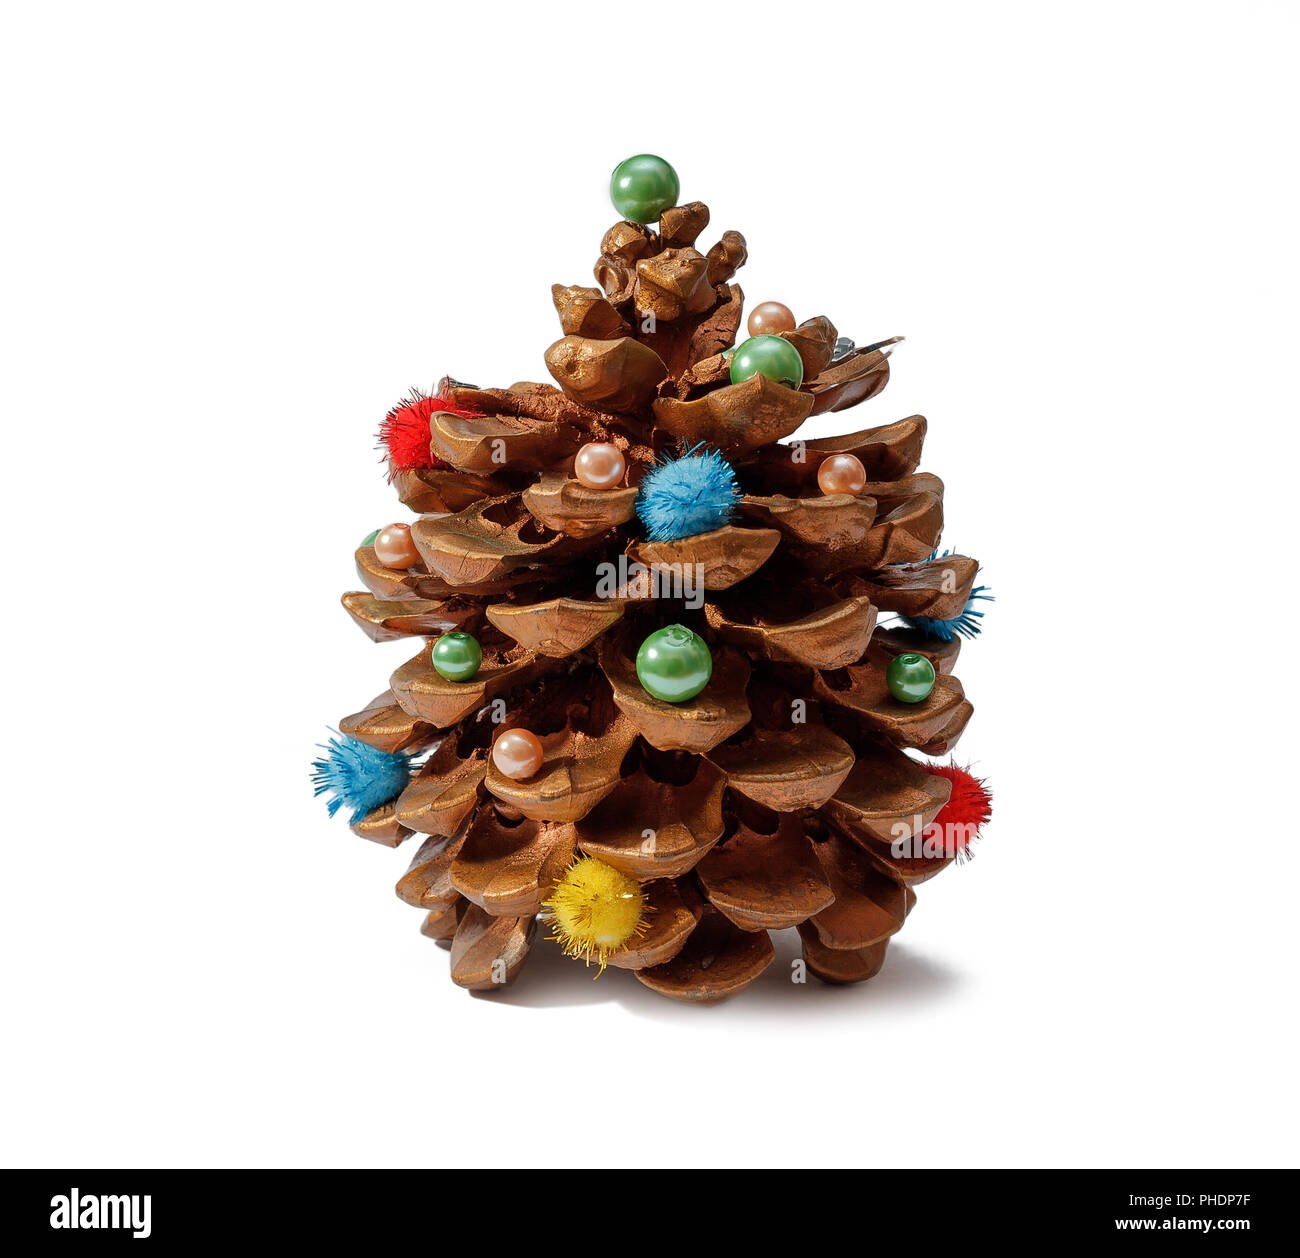 Pine cone with decorations Stock Photo